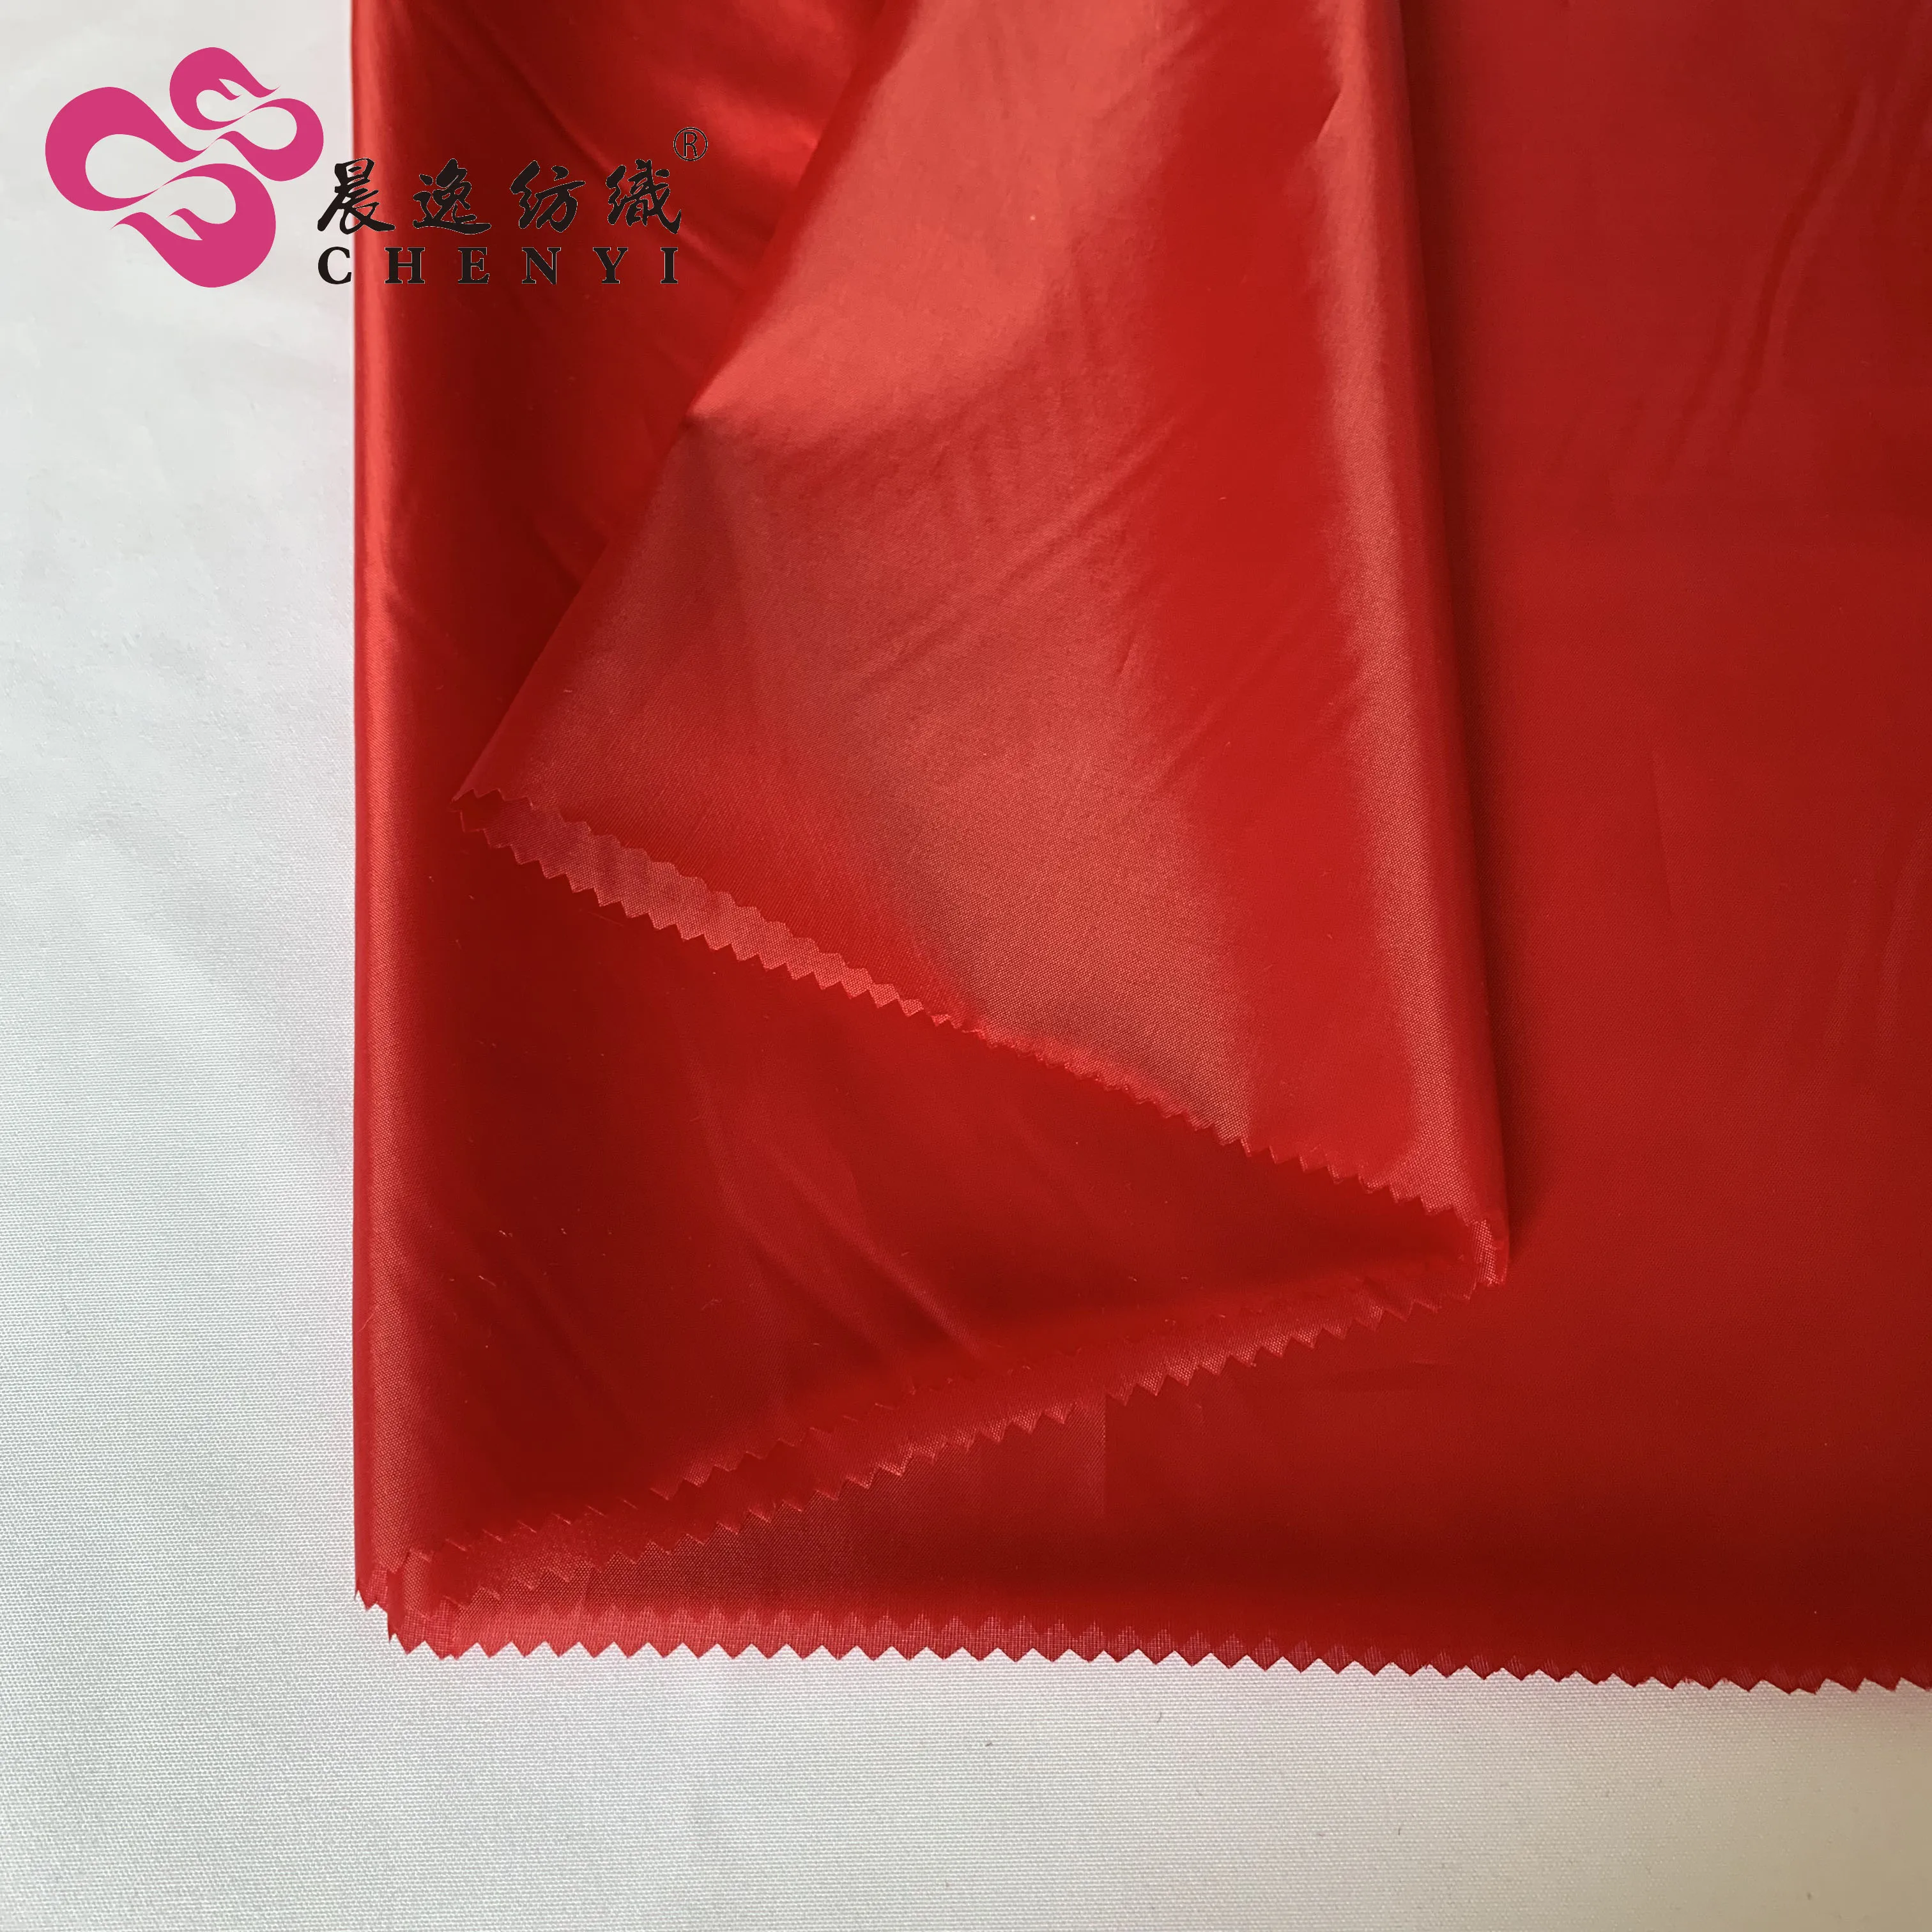 
hangzhou textiles 100% polyester lining fabric 